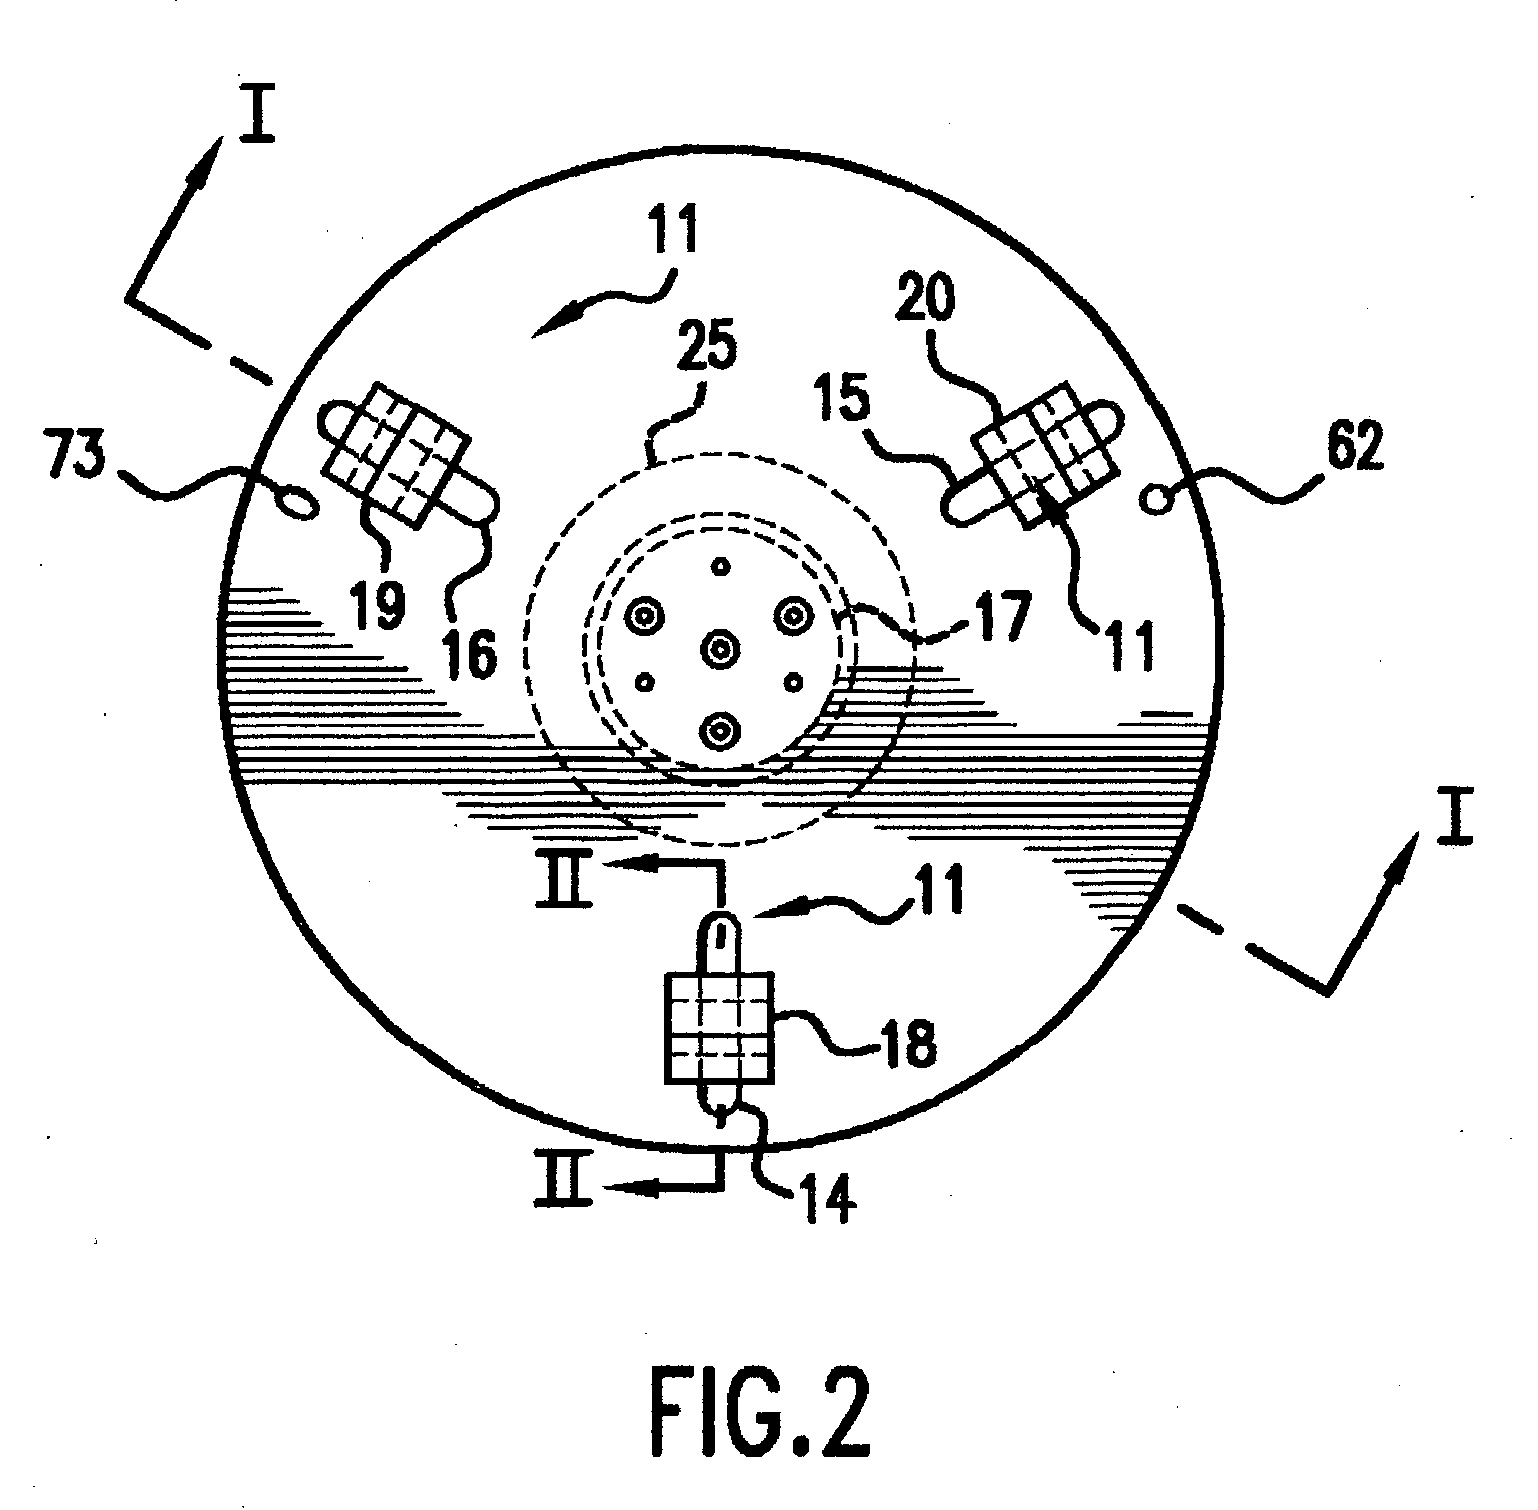 Powered turntable with universal, self-adjusting chuck for holding auto wheels and the like for polishing